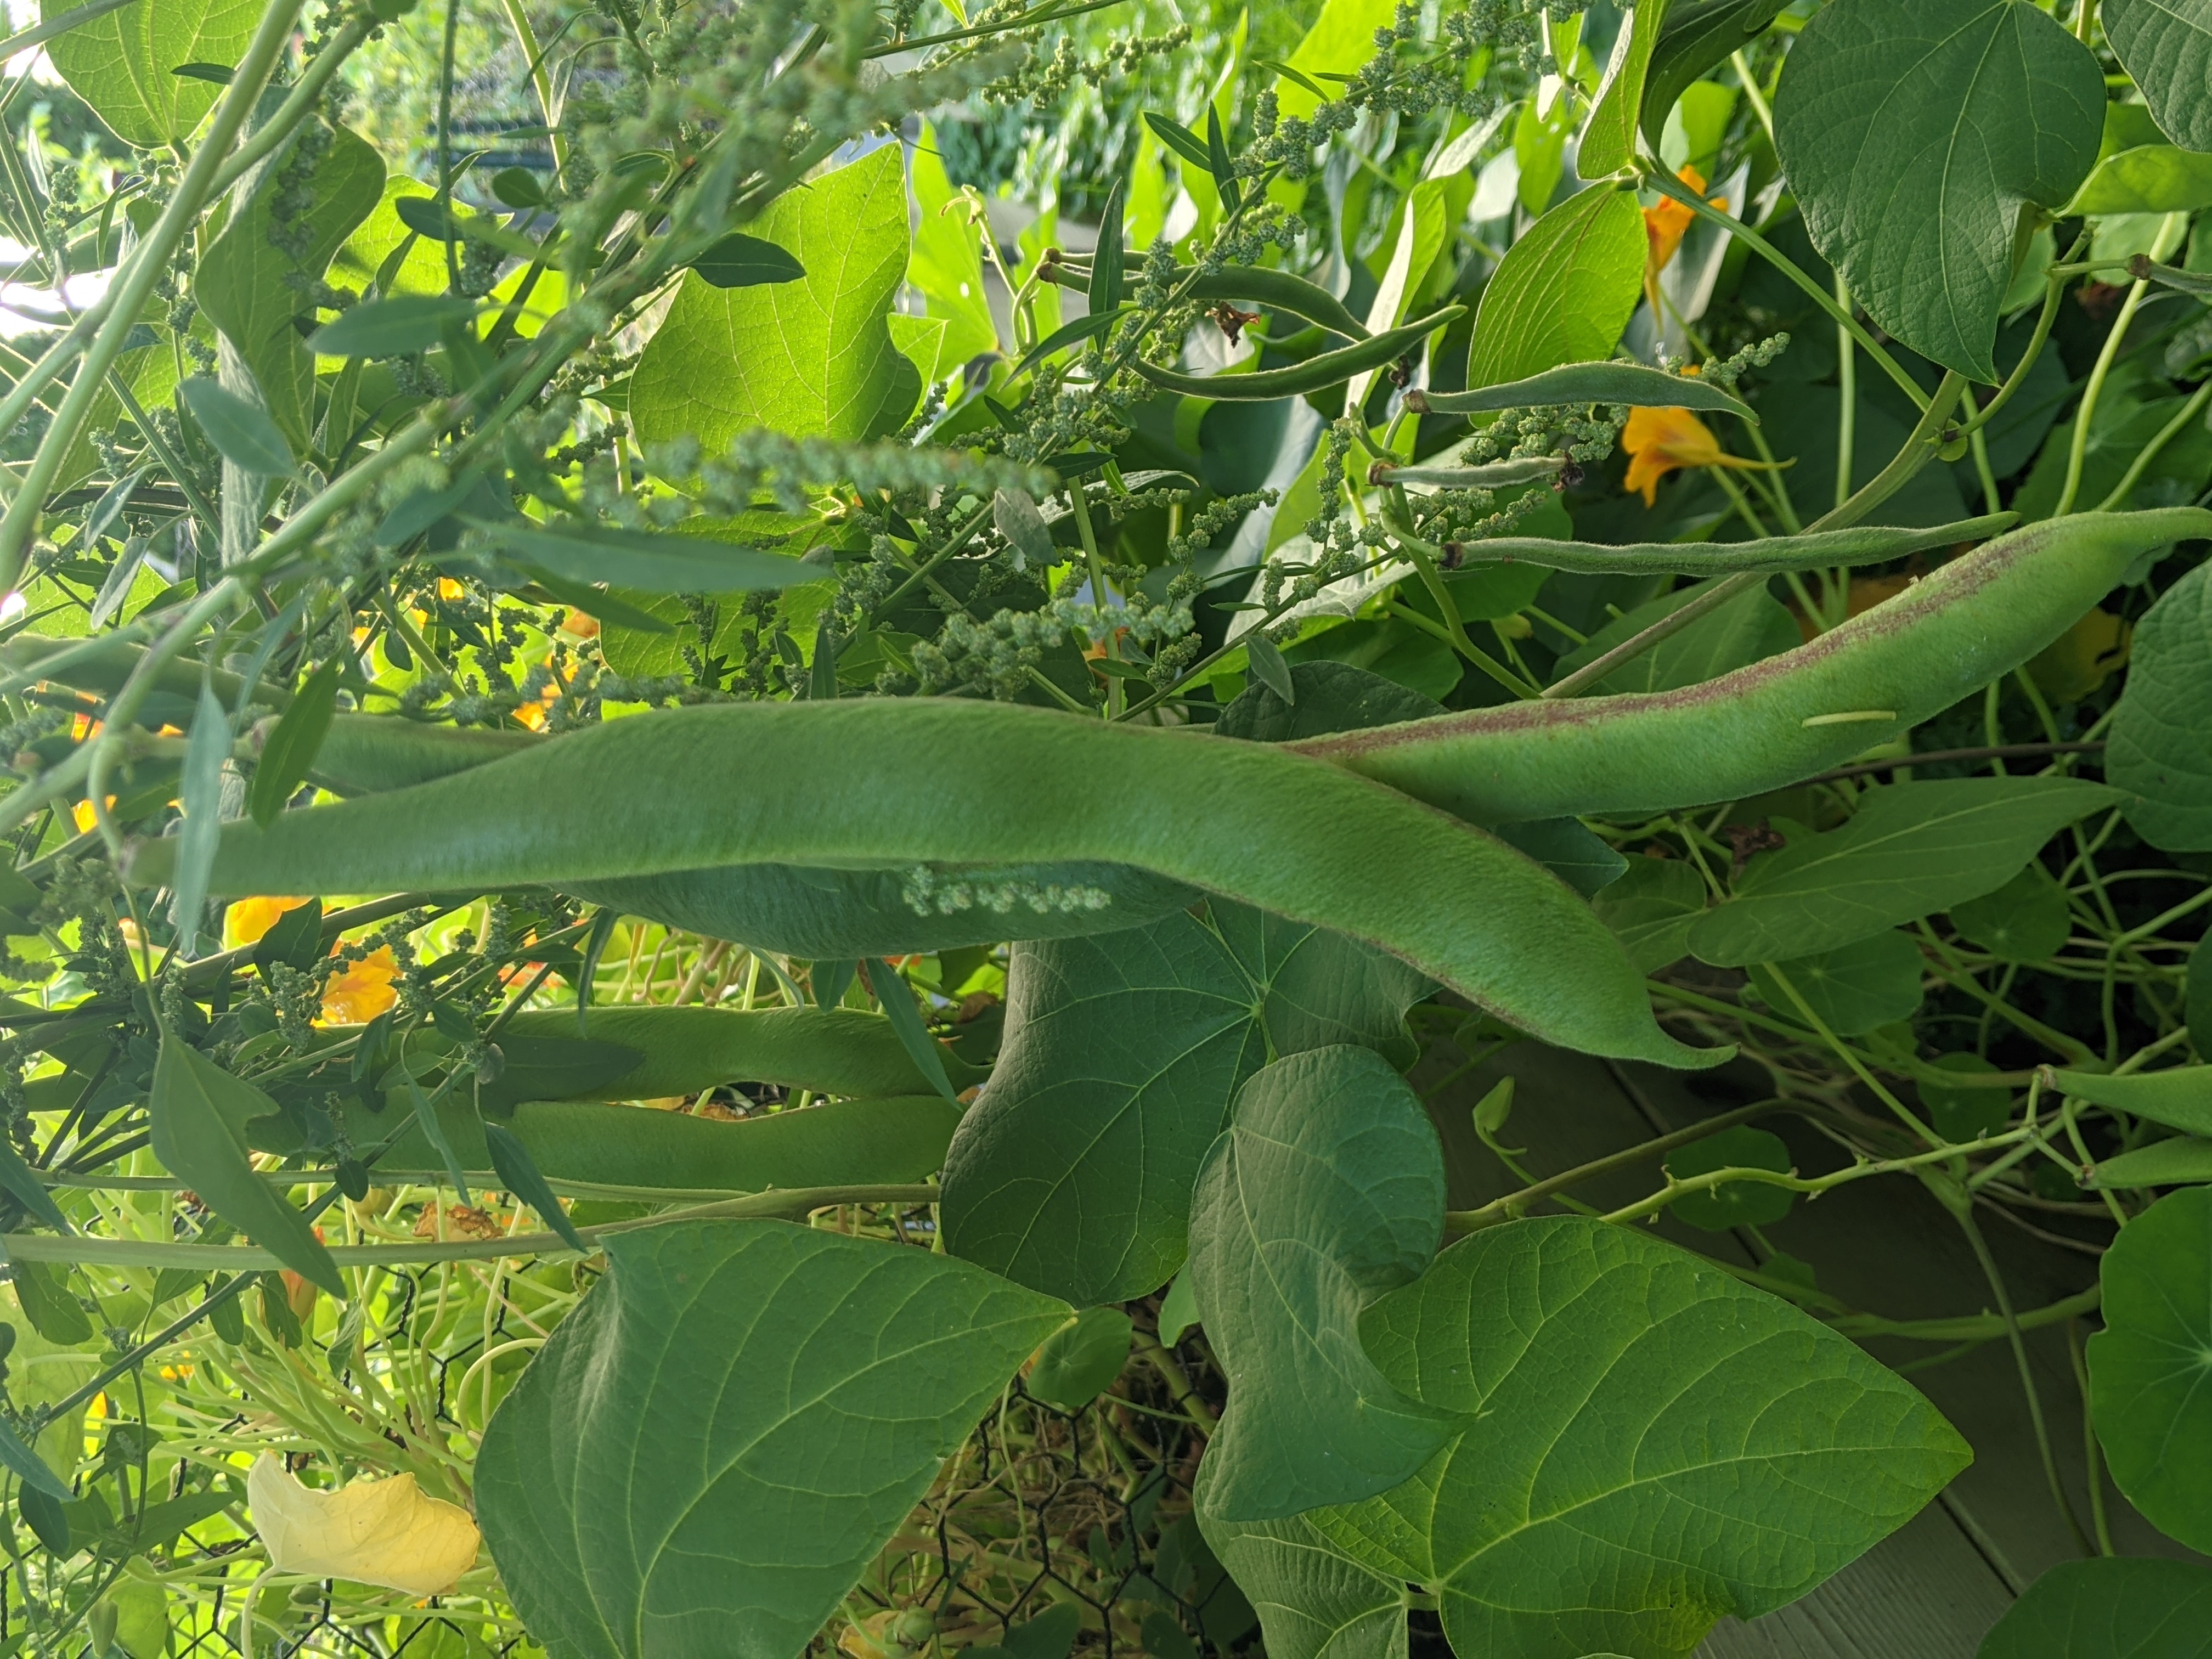 Scarlet runner beans (with green pods) hang from their vine